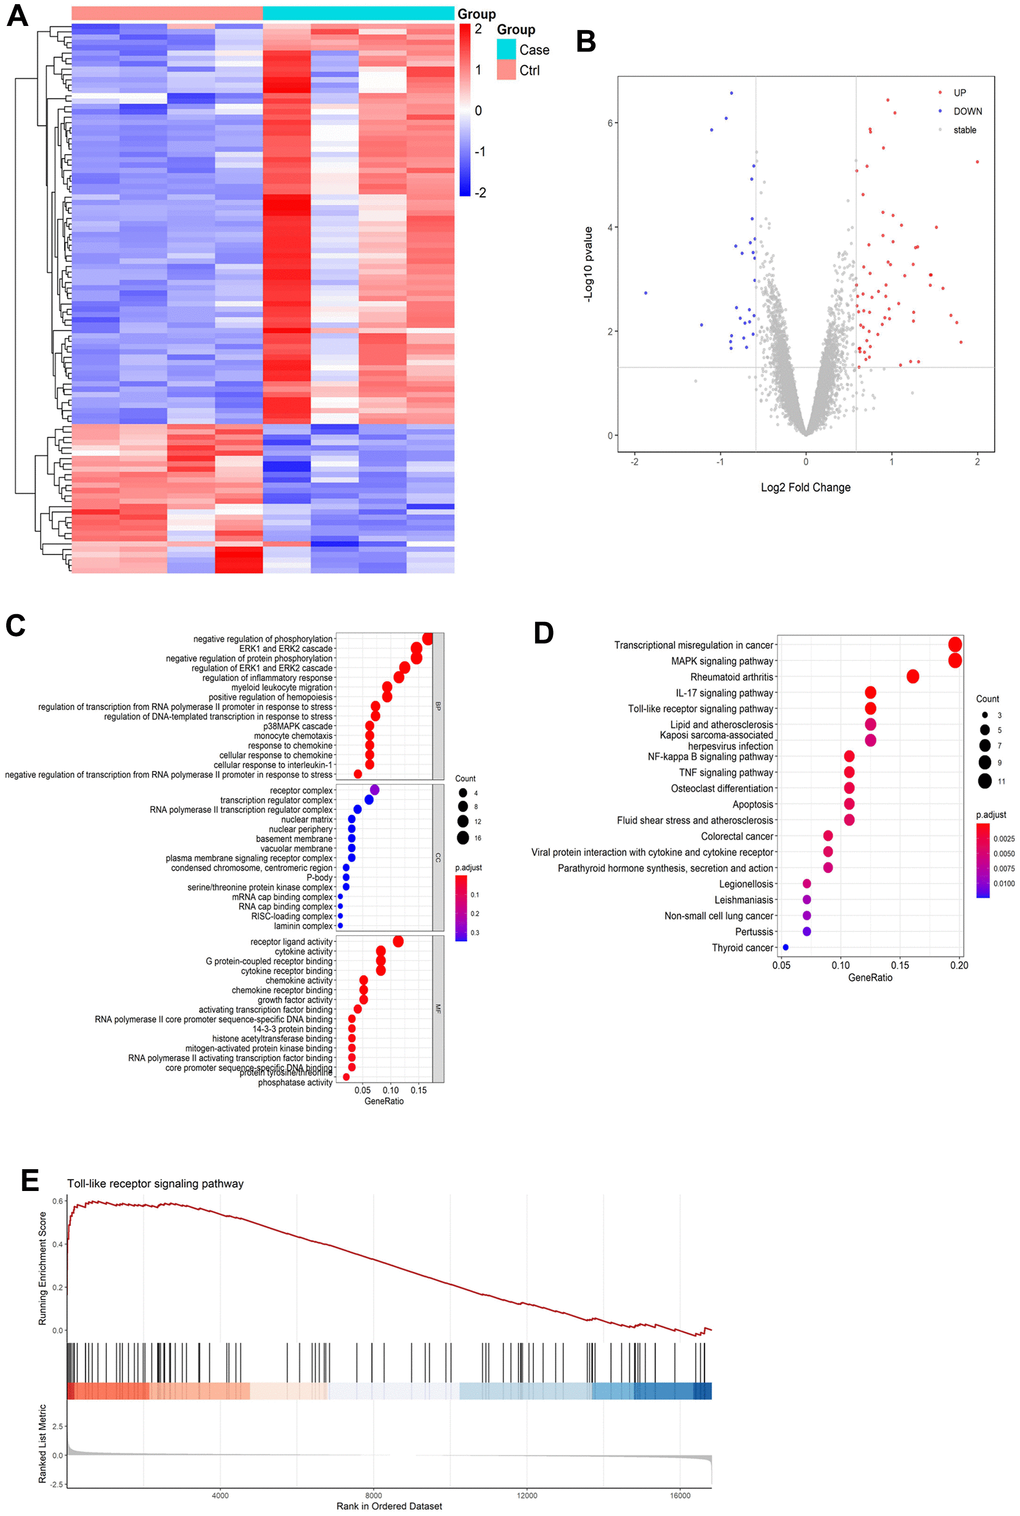 Results of bioinformatics analysis. (A) Differential gene volcano map. (B) Heatmap of differentially expressed gene cluster analysis. (C) GO enrichment analysis pathway diagram. (D) KEGG enrichment analysis pathway diagram. (E) GSEA gene enrichment analysis diagram of Toll-like receptor signaling pathways.